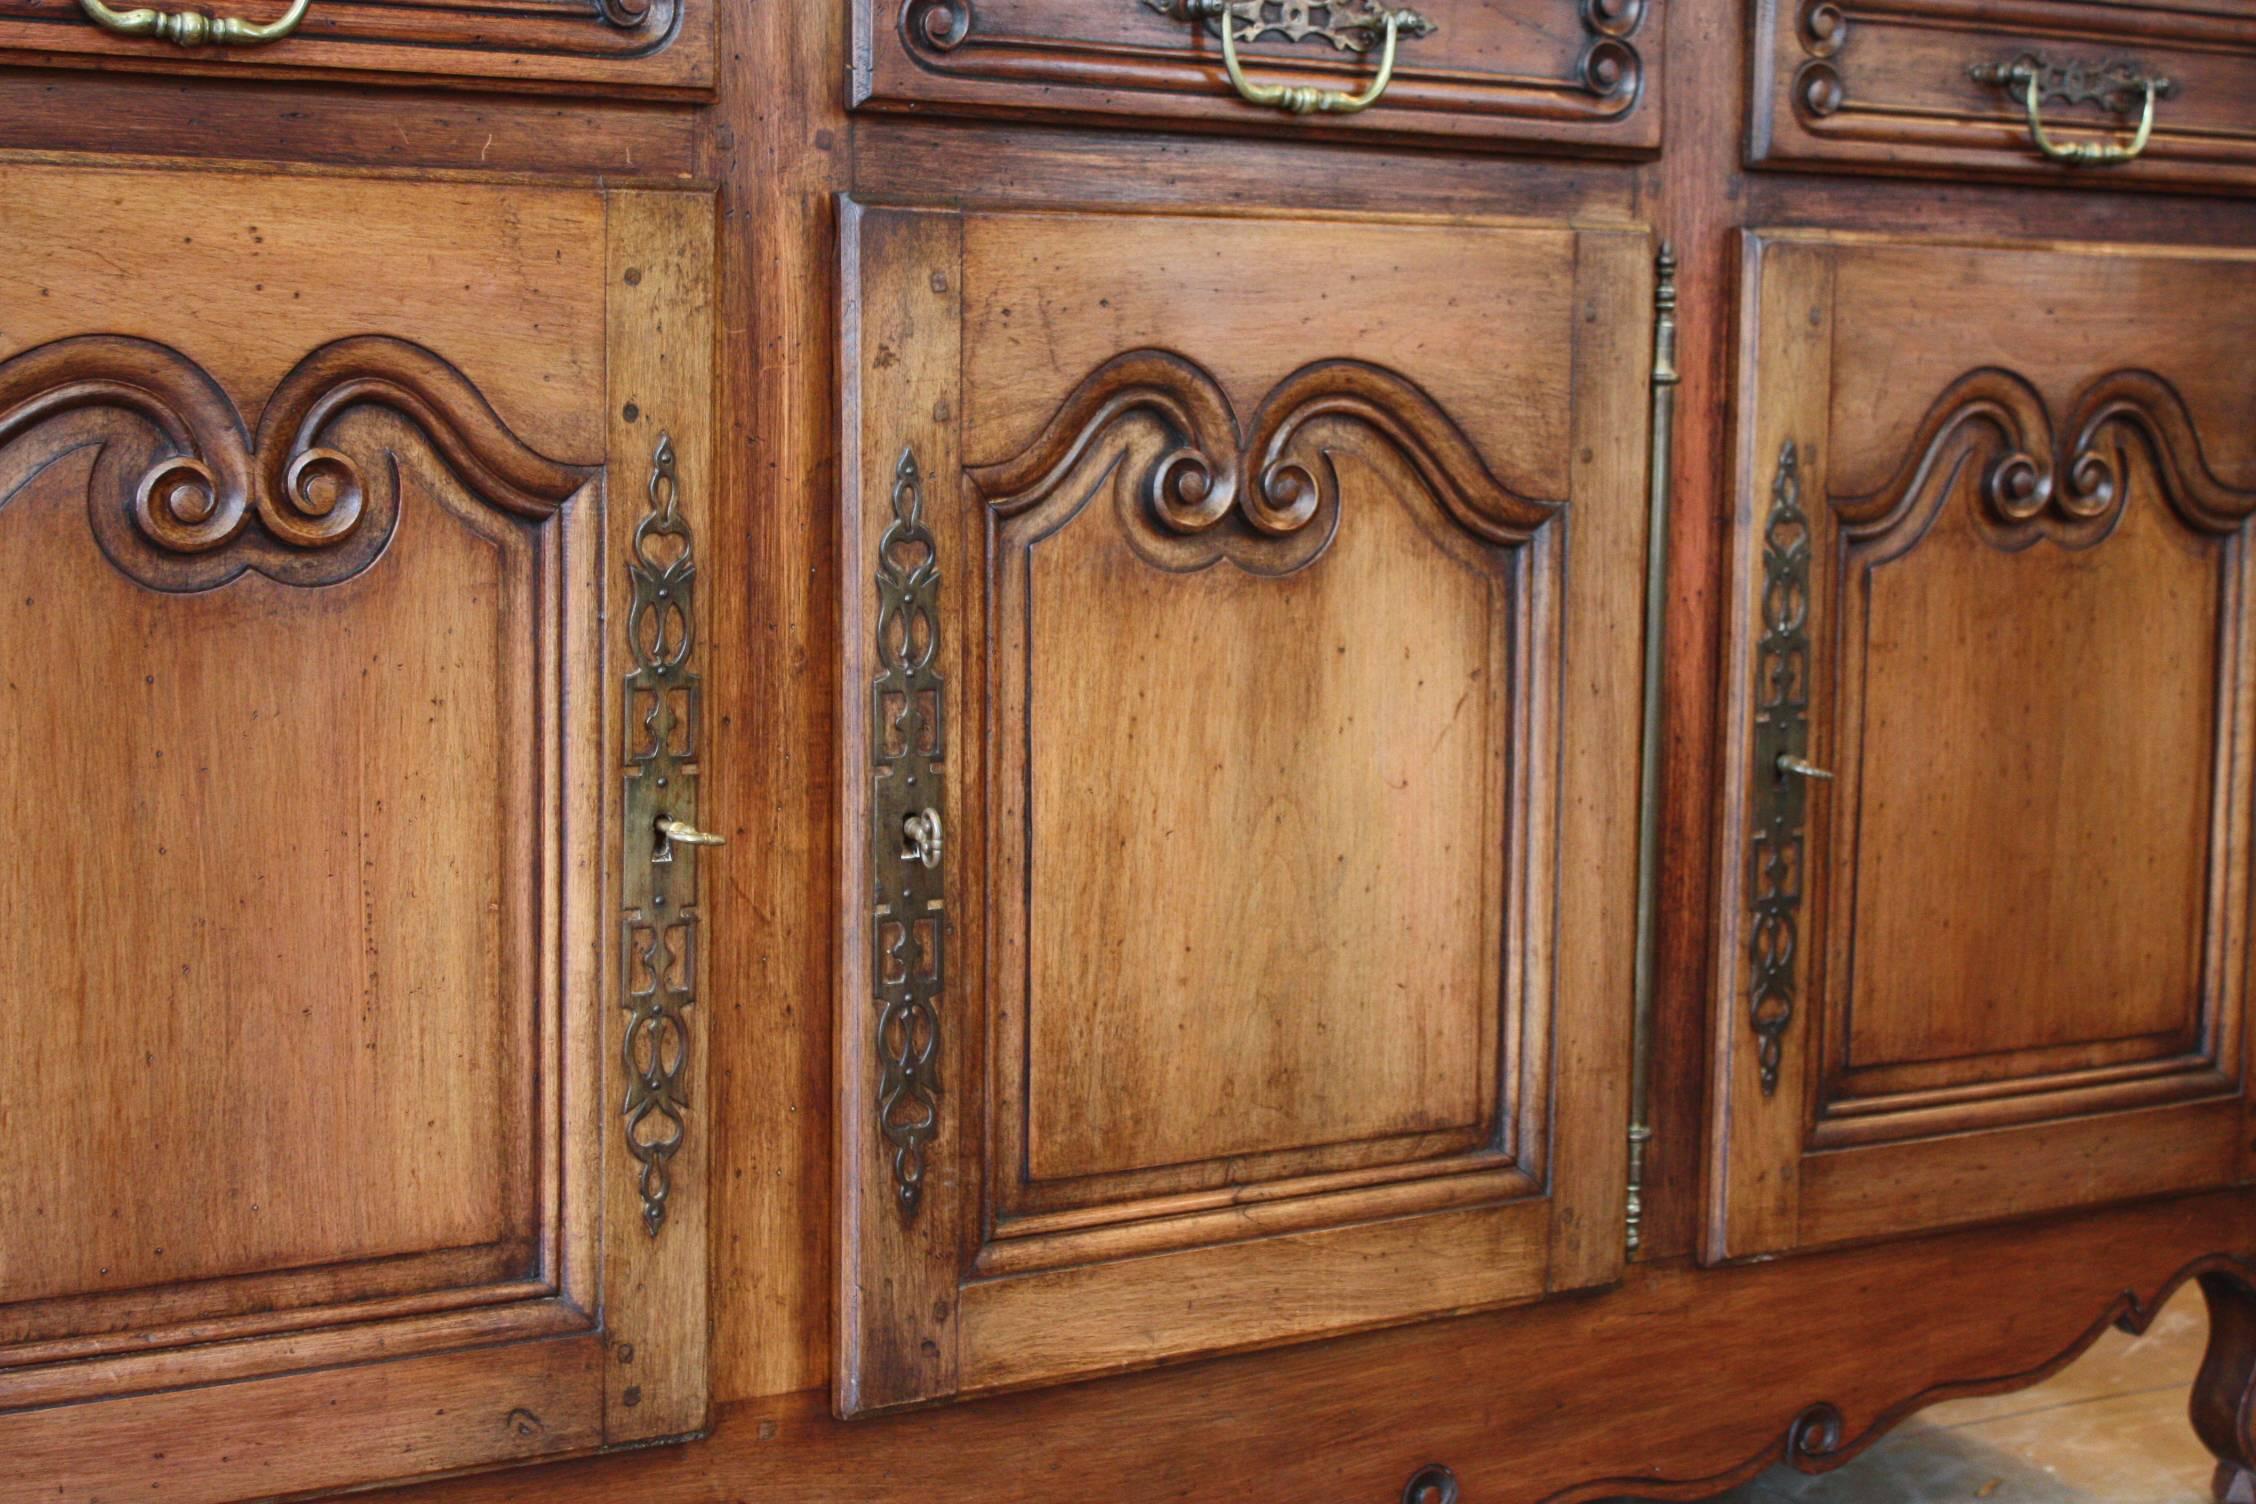 This exceptional Louis XV period enfilade features three panelled doors and three drawers. Perfect for a dining room setting. This piece also has its four original hand-forged locks, with working keys. A piece of history, both beautiful and